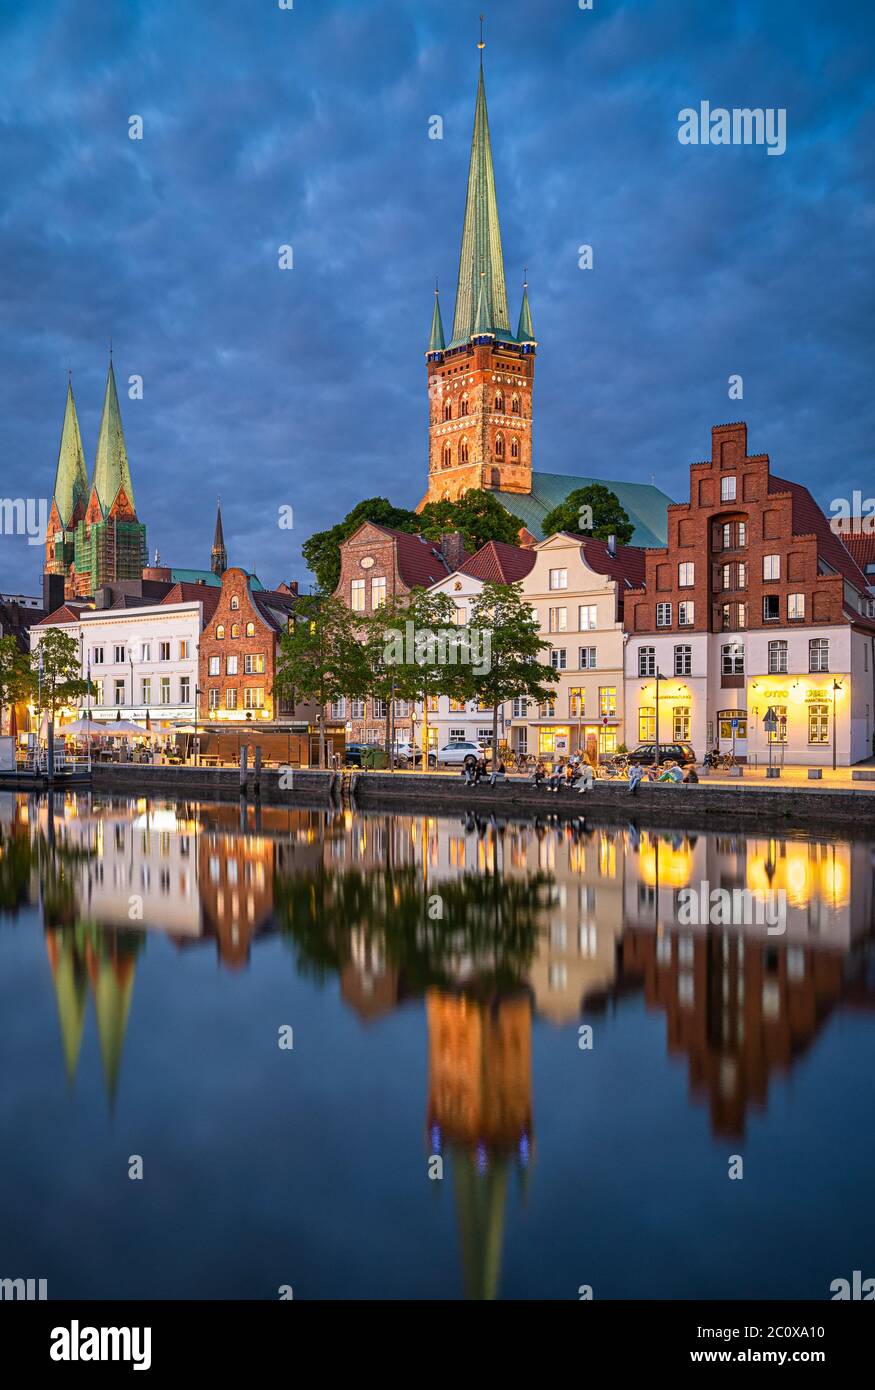 Old town of Lubeck, Germany at night Stock Photo